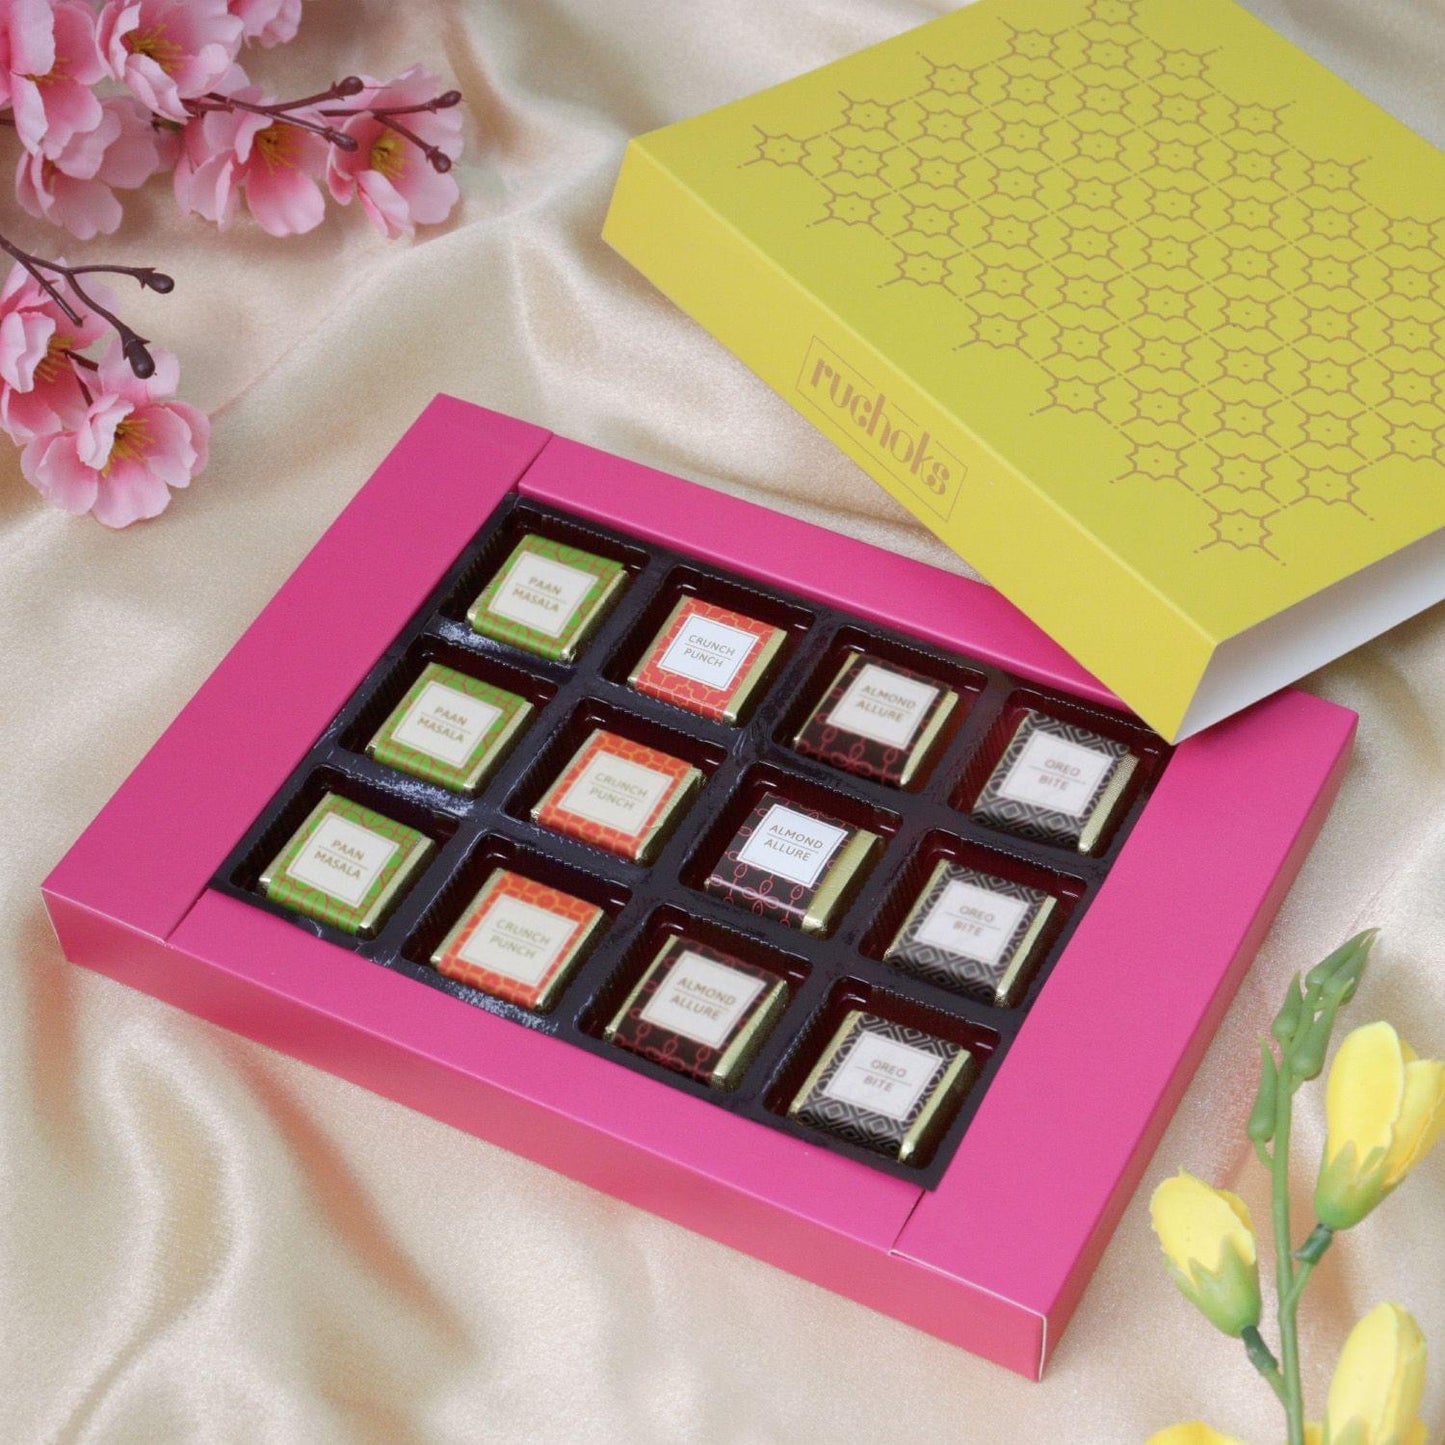 RUCHOKS - Premium Assorted Chocolates | Box of 12 Pcs - 12g Each | Assorted Flavoured Chocolates Packed in a Beautiful Gift Box - 140g